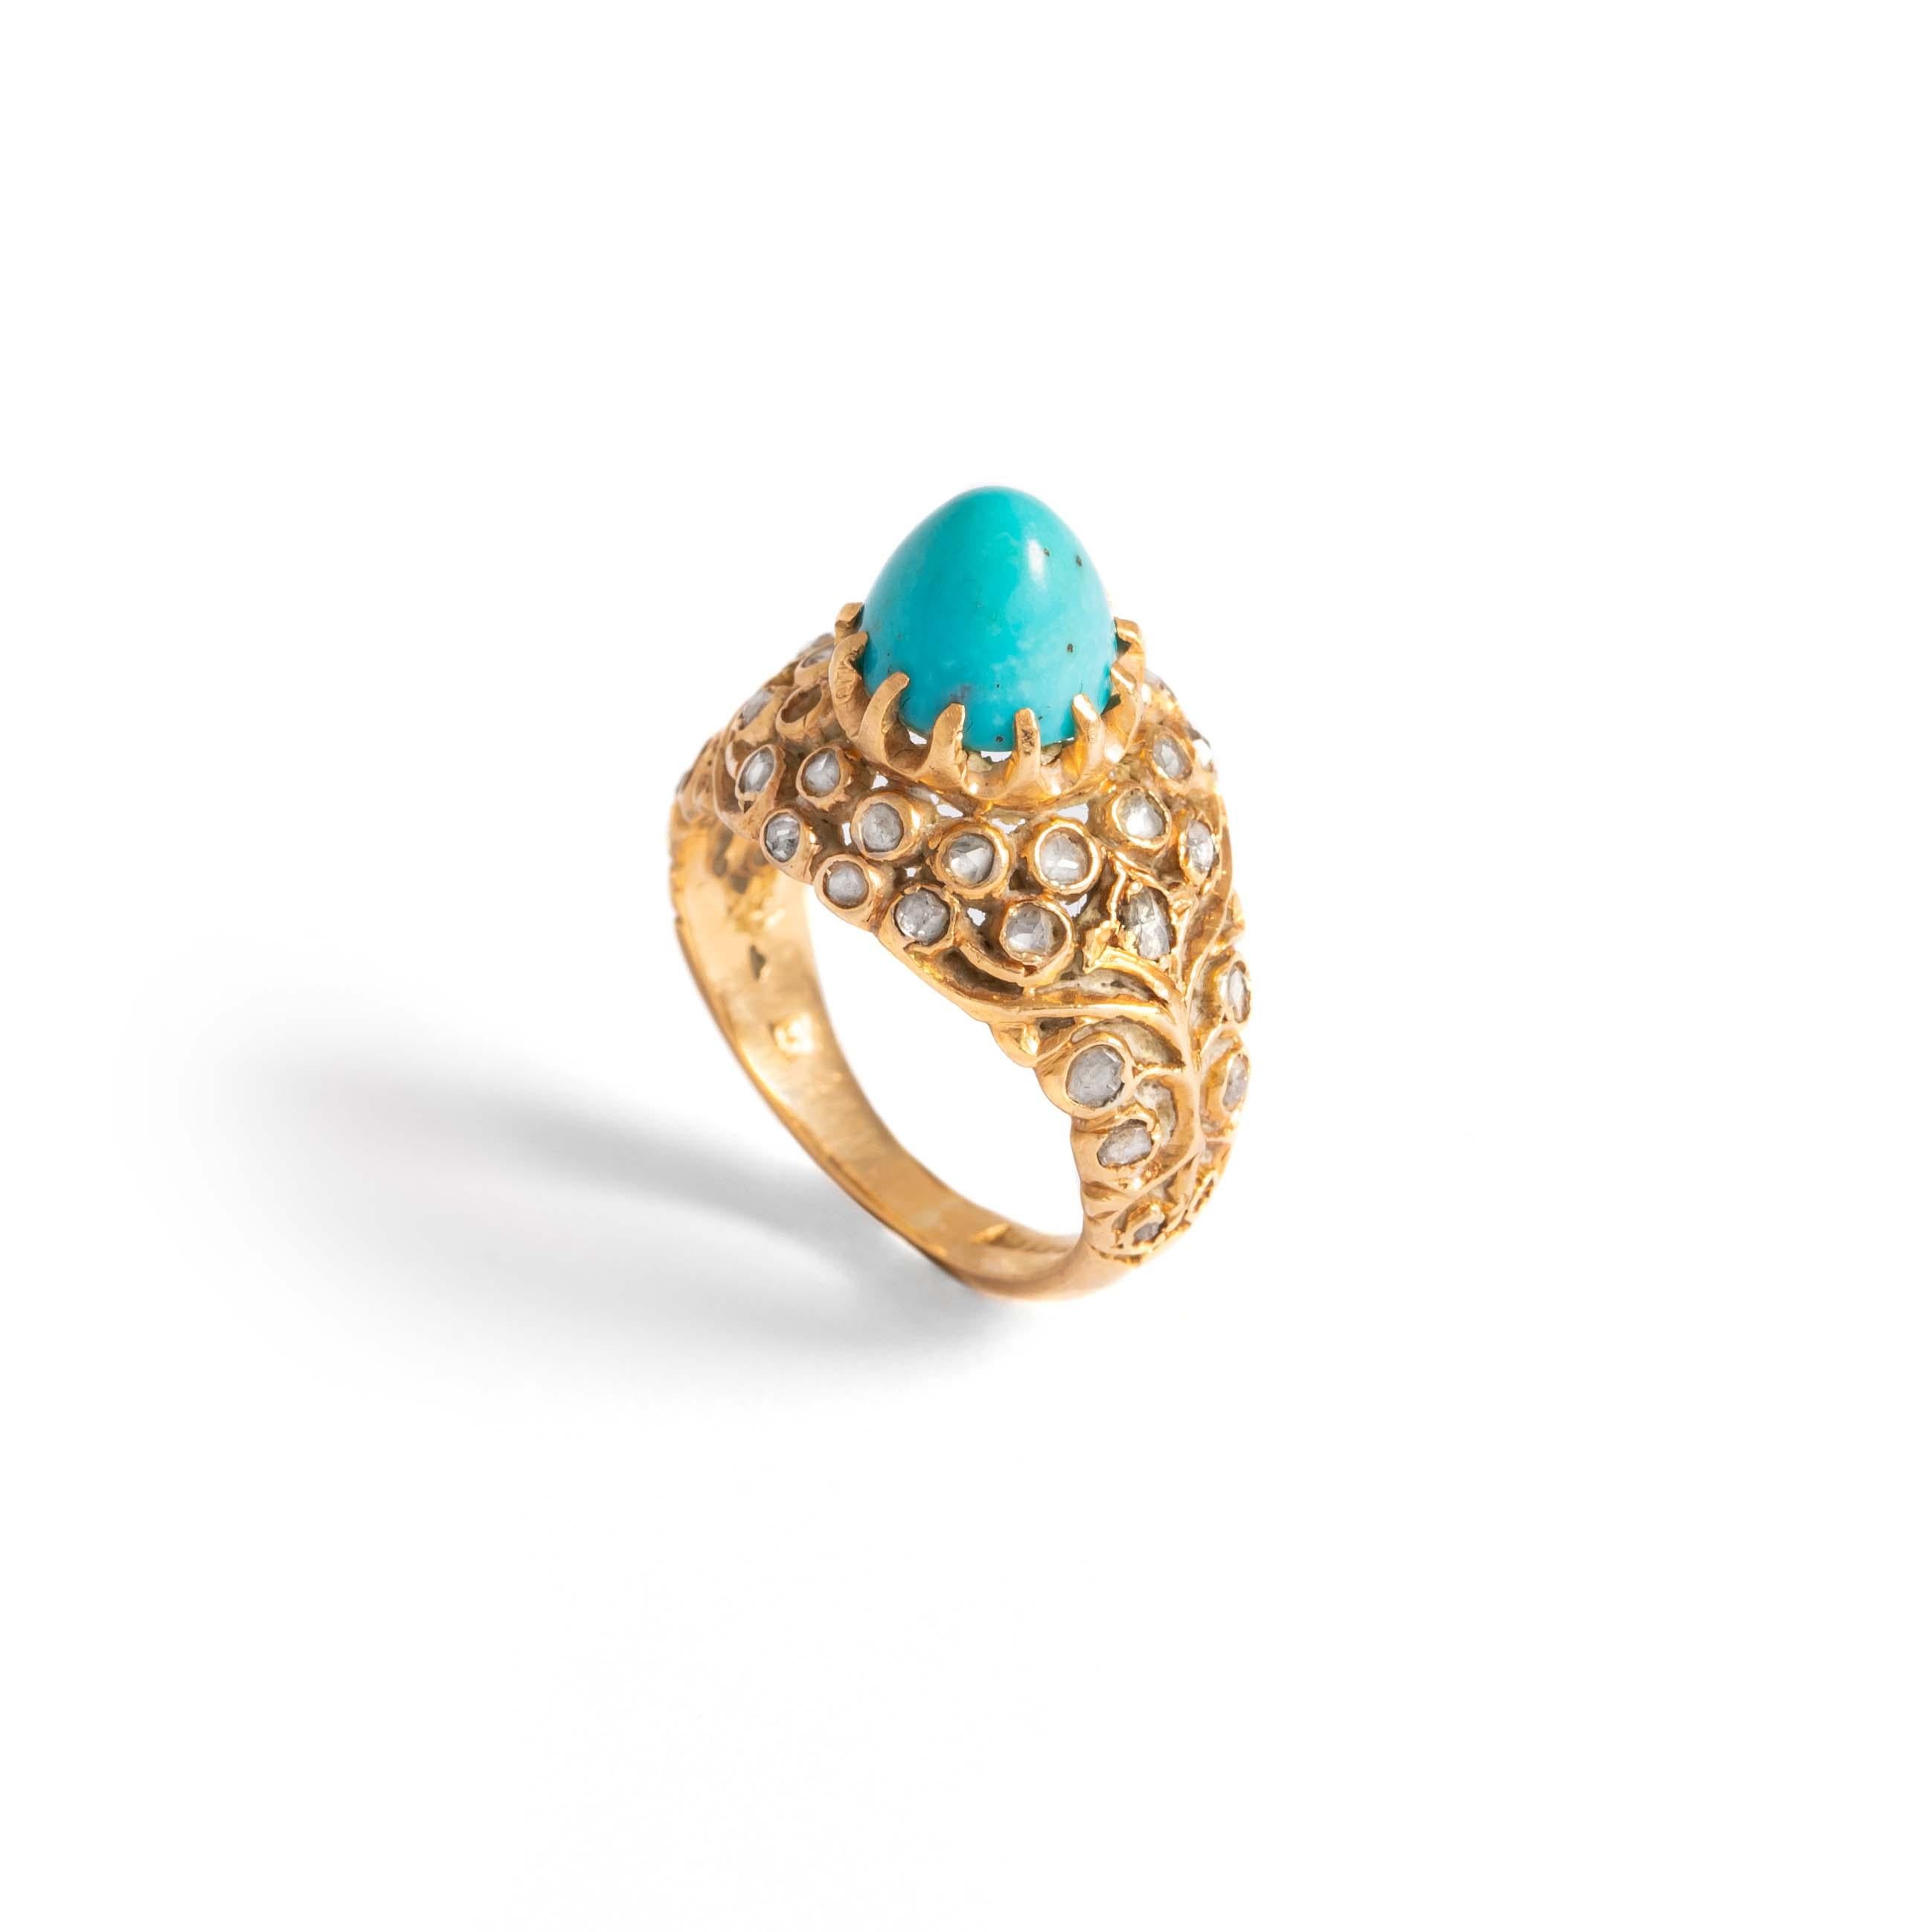 18K yellow gold ring set by rose-cut diamonds and centered by a cabochon turquoise.
Early 20th Century. Ottoman work.
Gross weight: 4.56 grams.